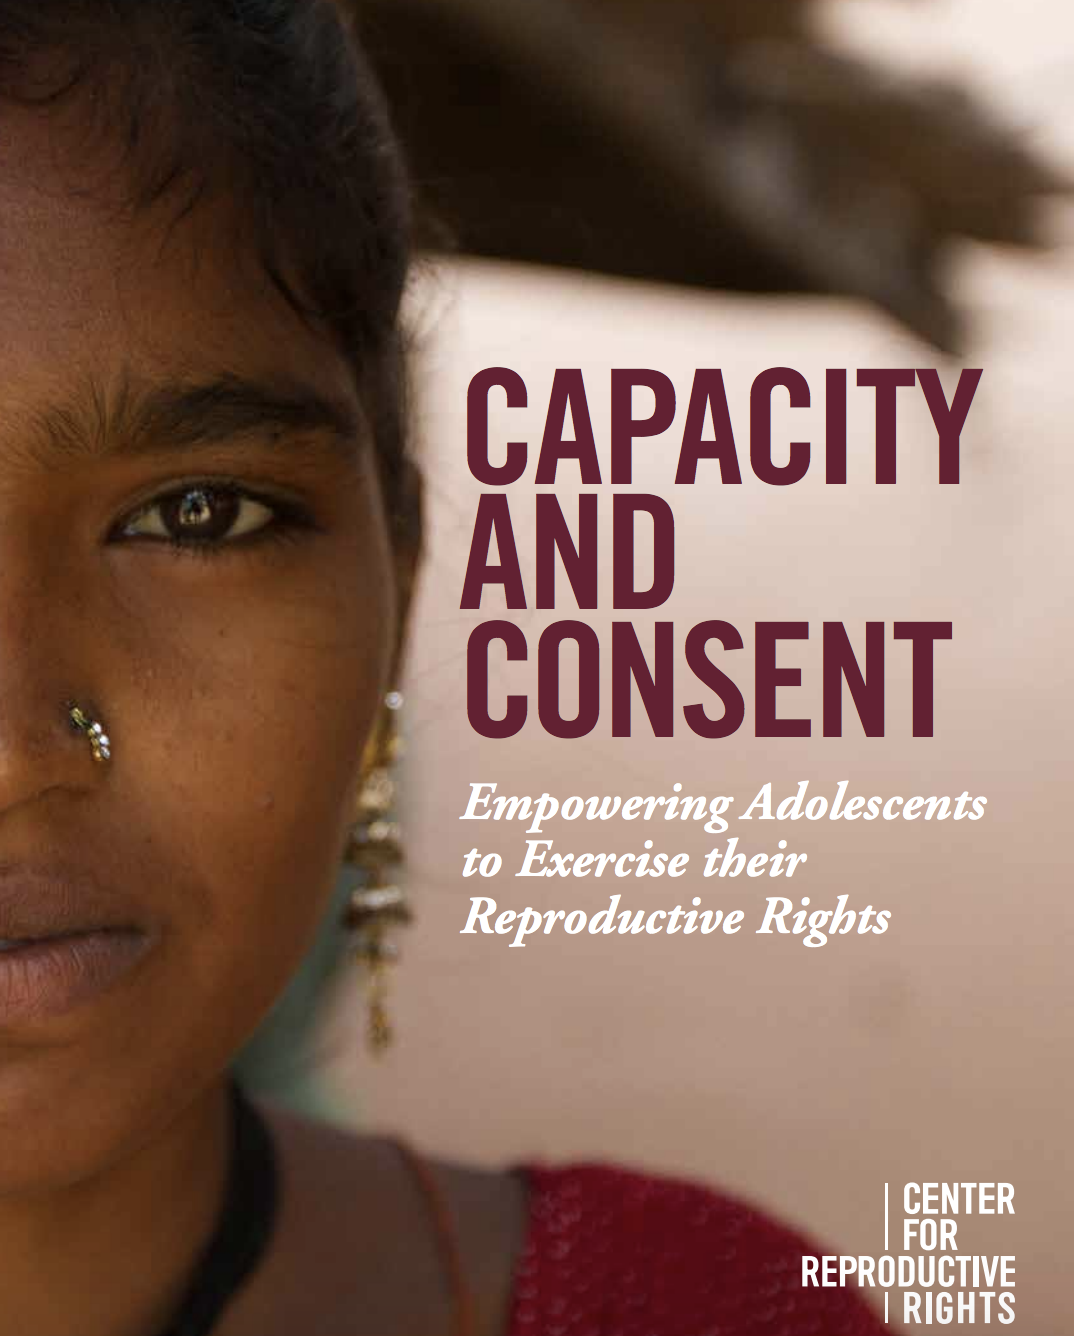 Capacity and Consent: Empowering Adolescents to Exercise their Reproductive Rights